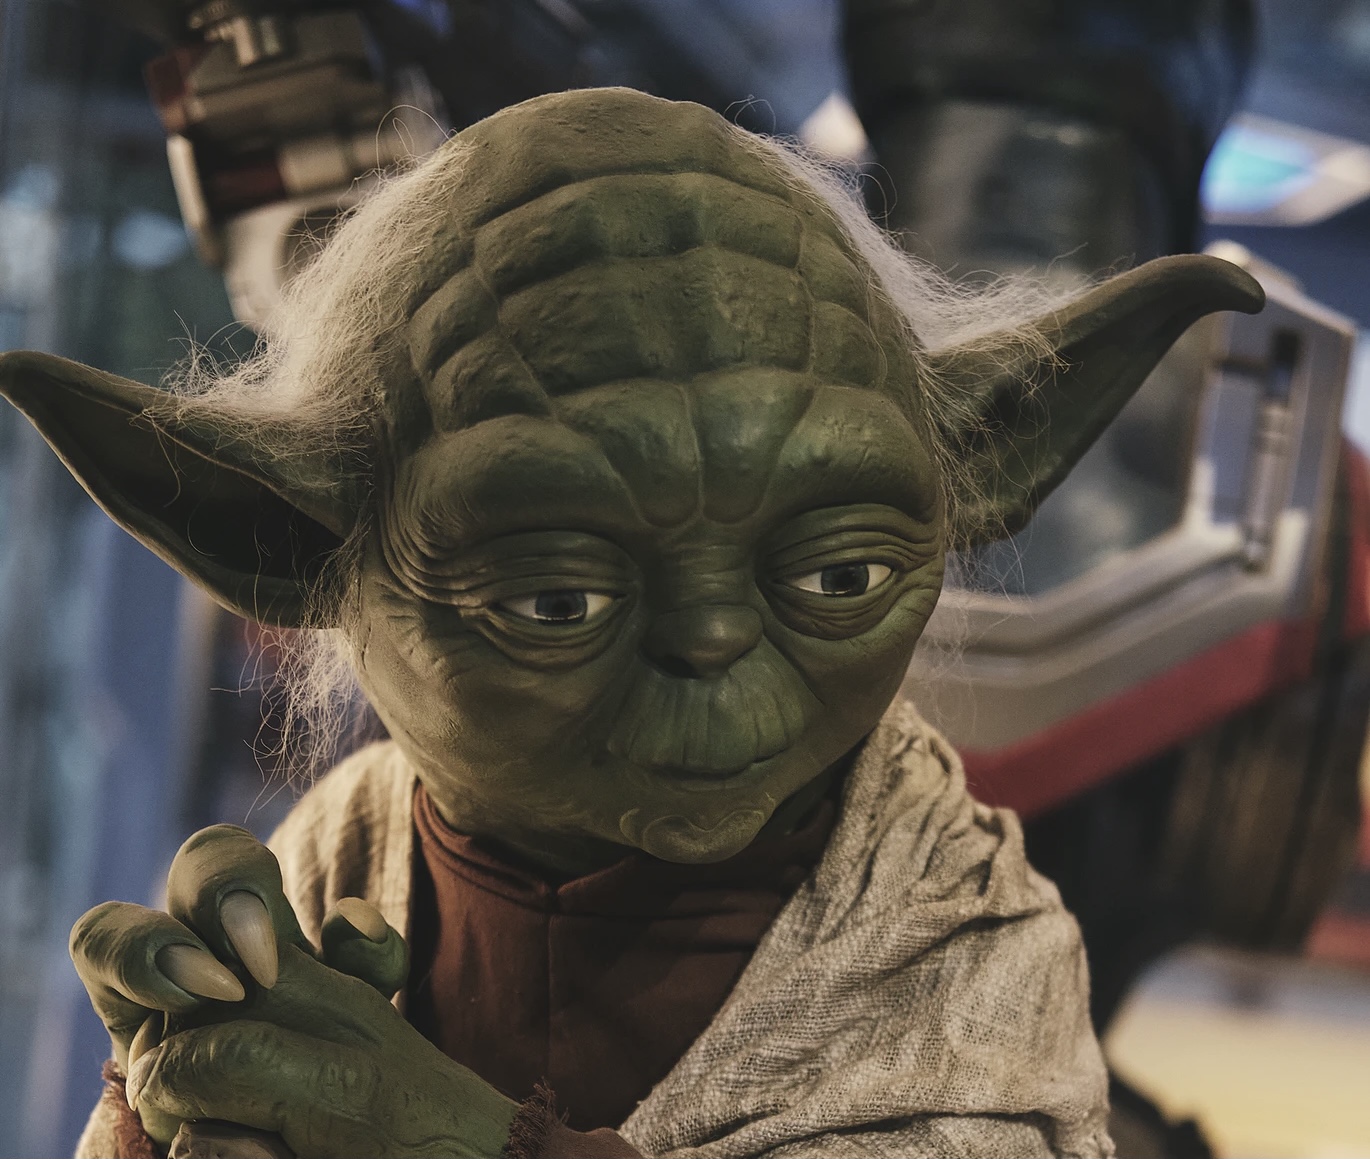 NEWS | Petition for a statue of Yoda in Hereford started and here’s the reason